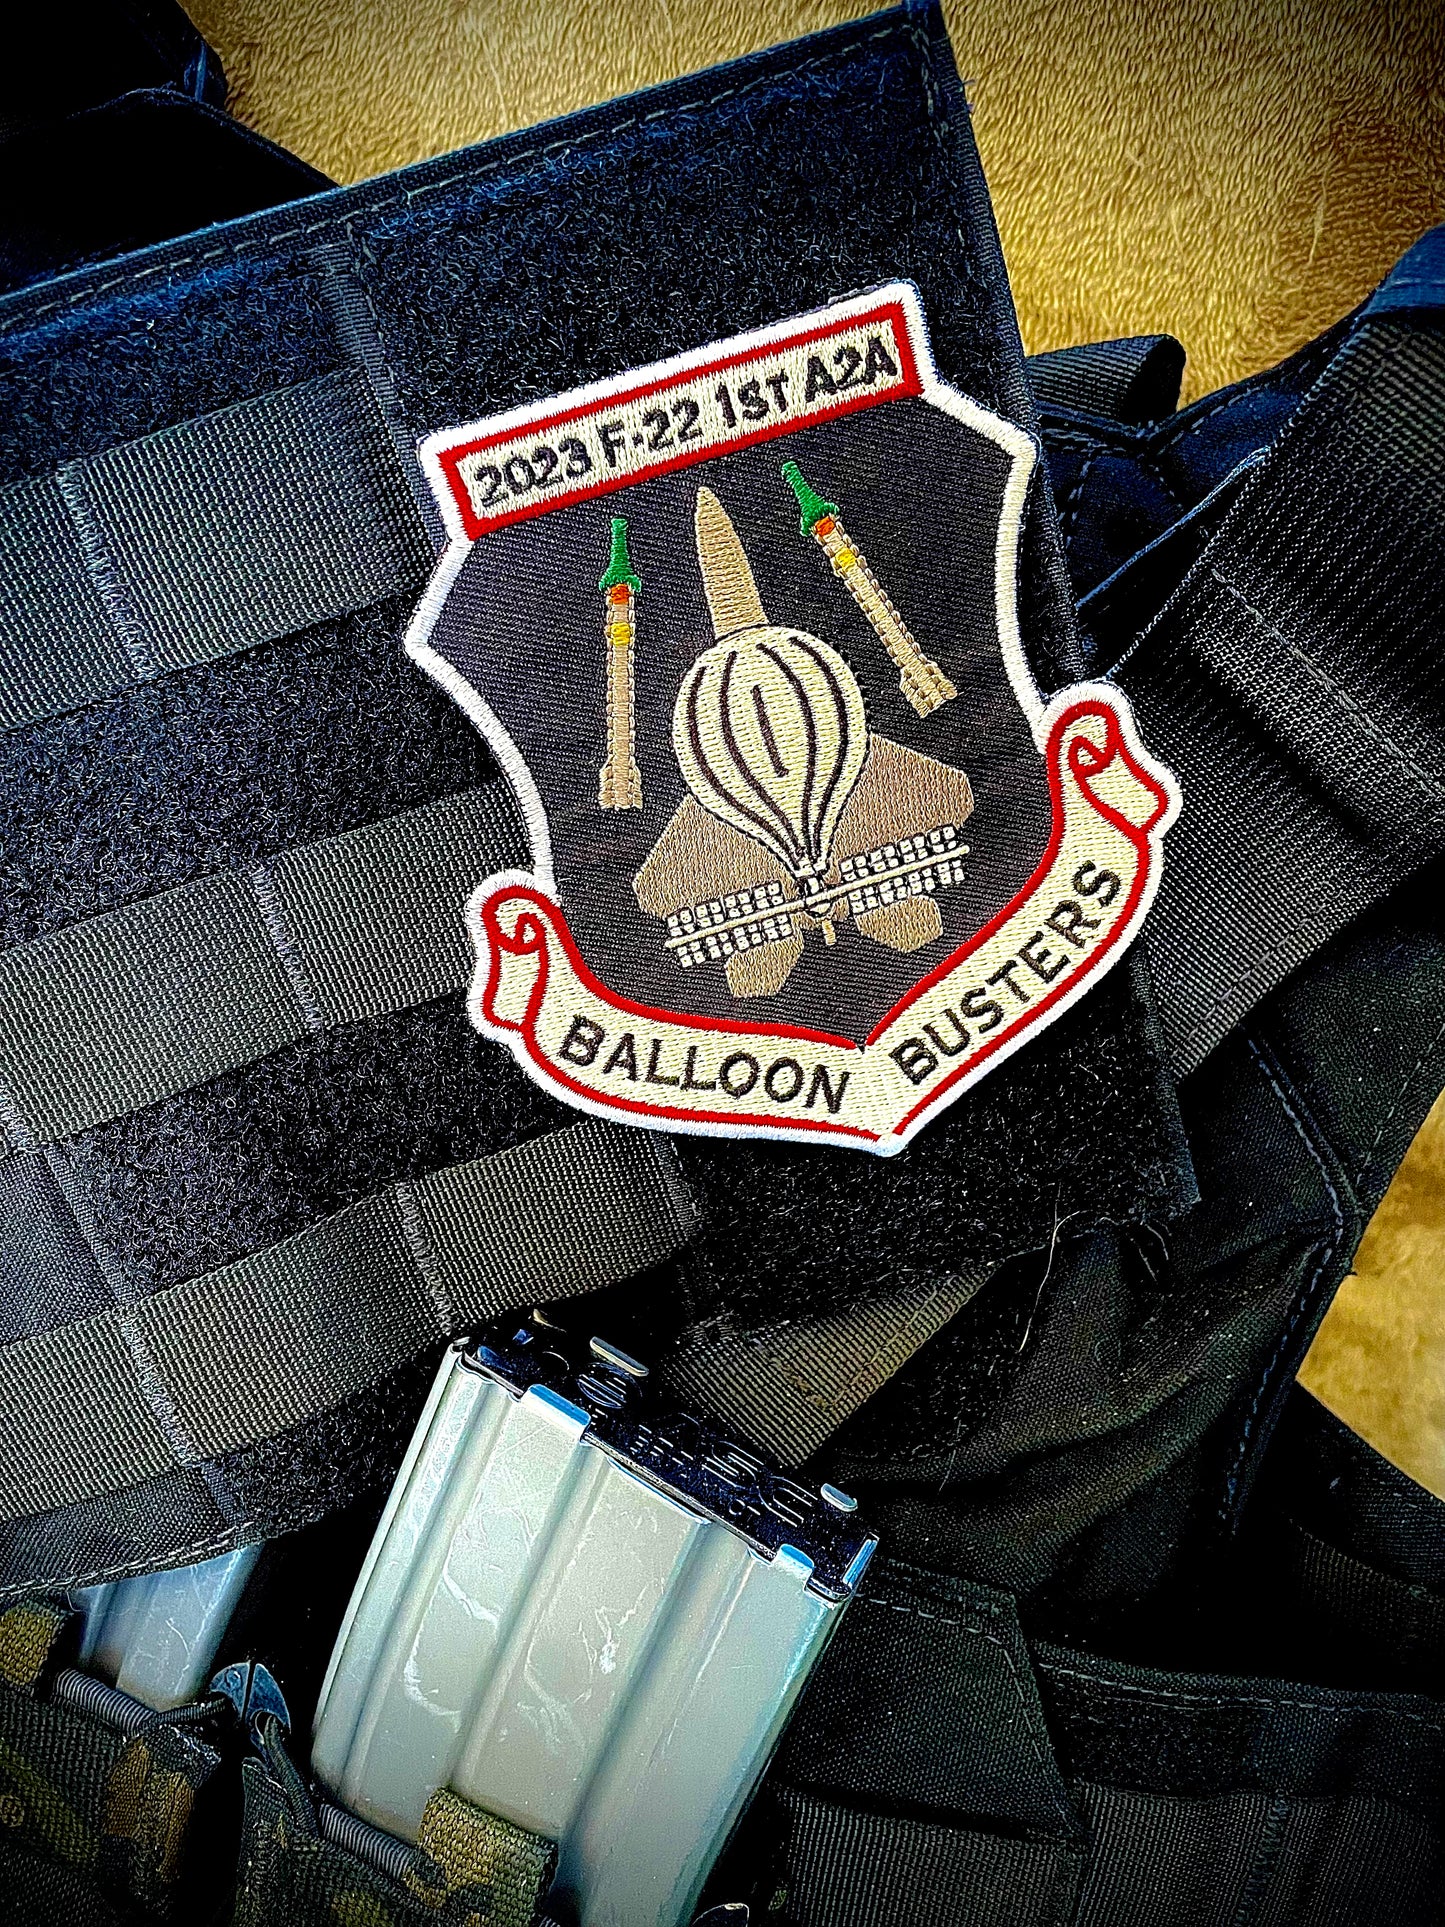 F22 Raptor “Balloon Busters” First Air-To-Air Kill Mission Patch Inspired Patch